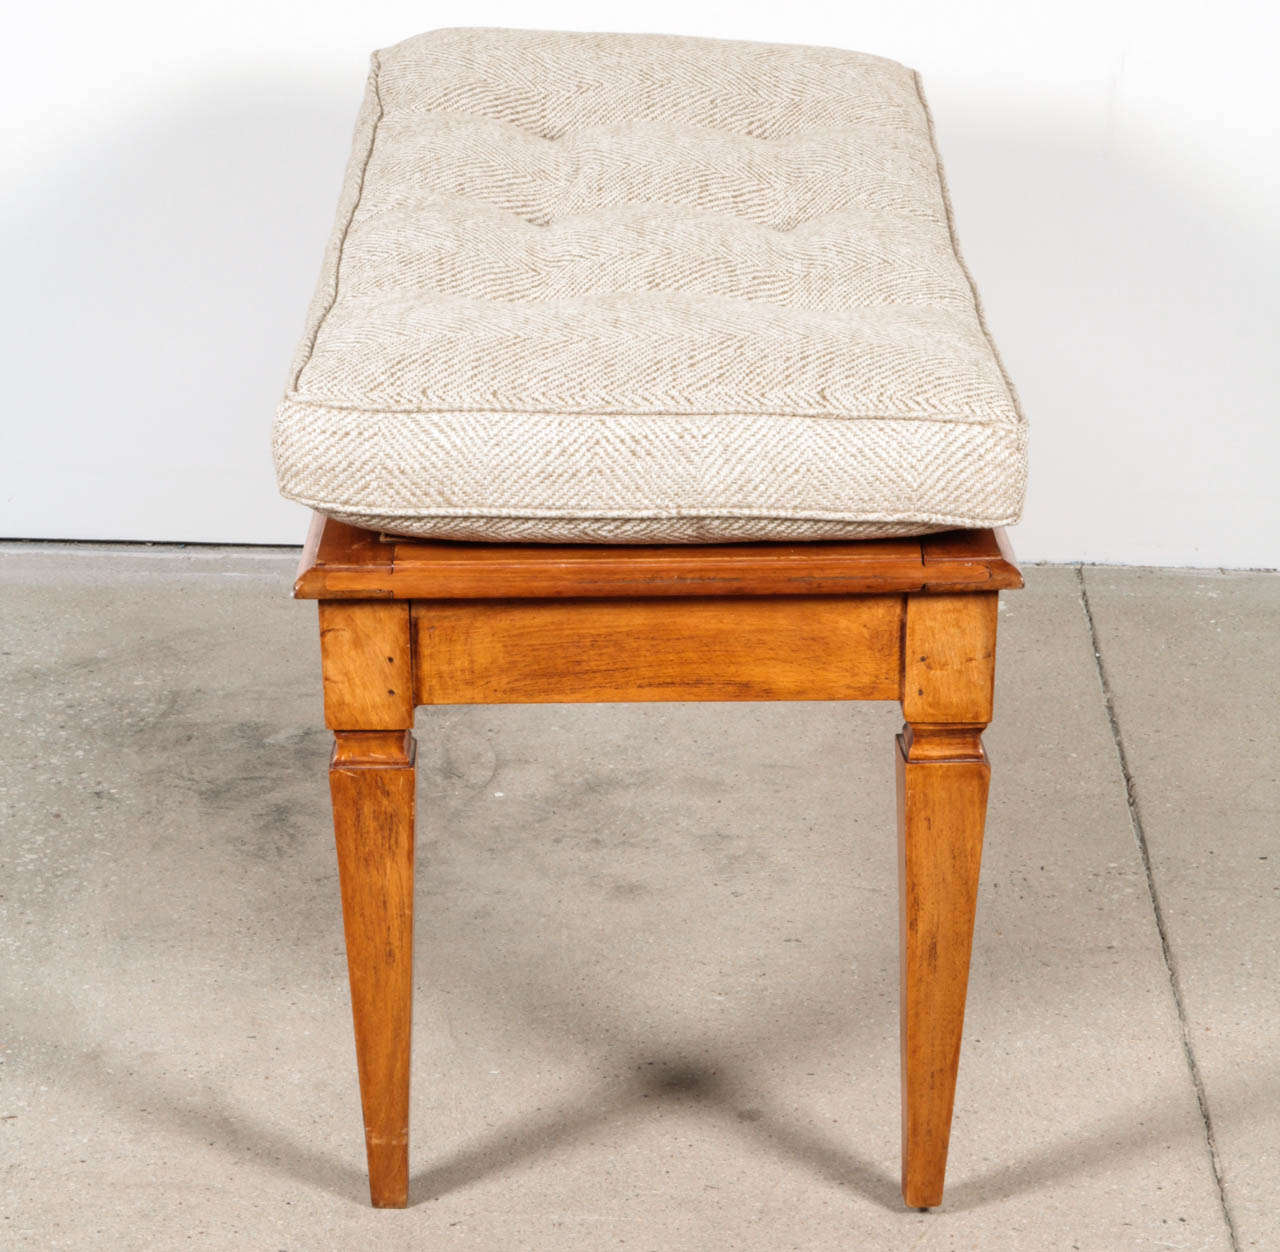 Wood One Walnut Caned Bench with Tufted Cushion